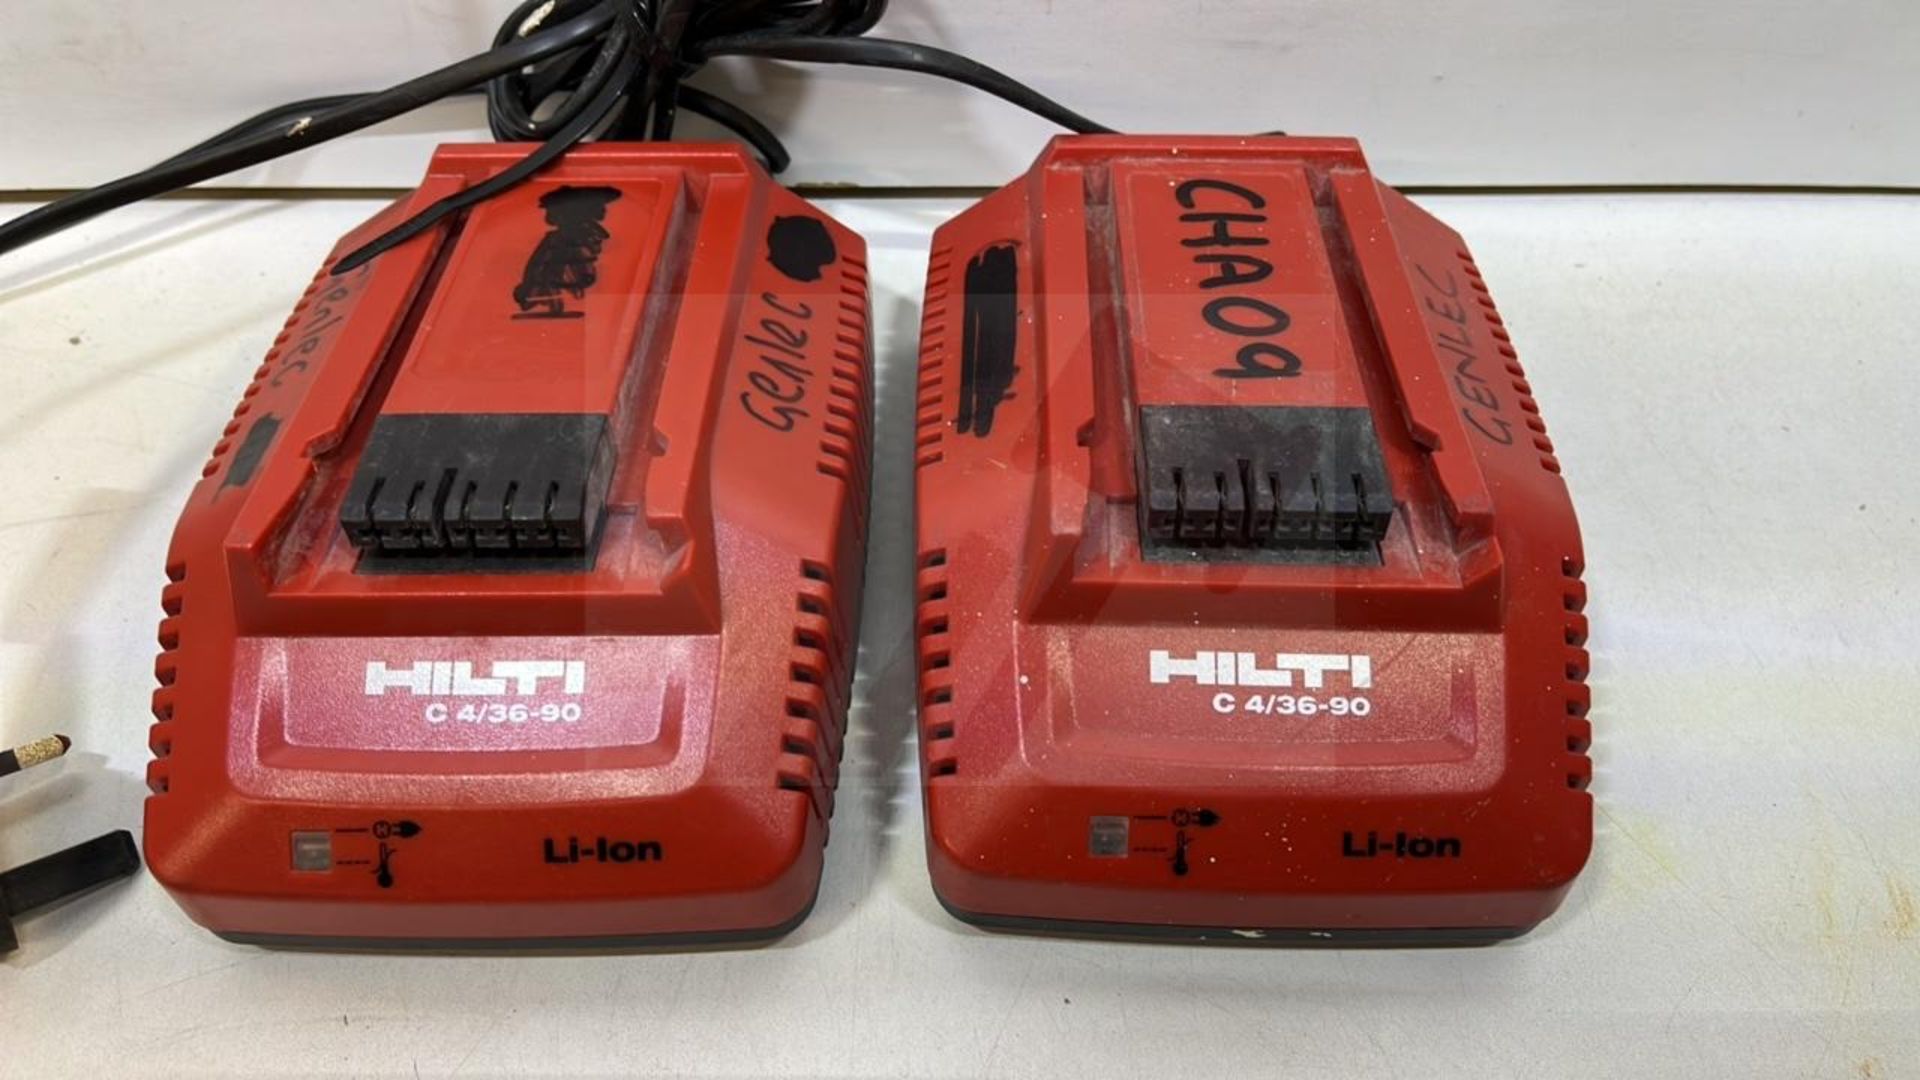 2 x Hilti C4/36-90 Li-ion Battery Chargers - Image 2 of 2